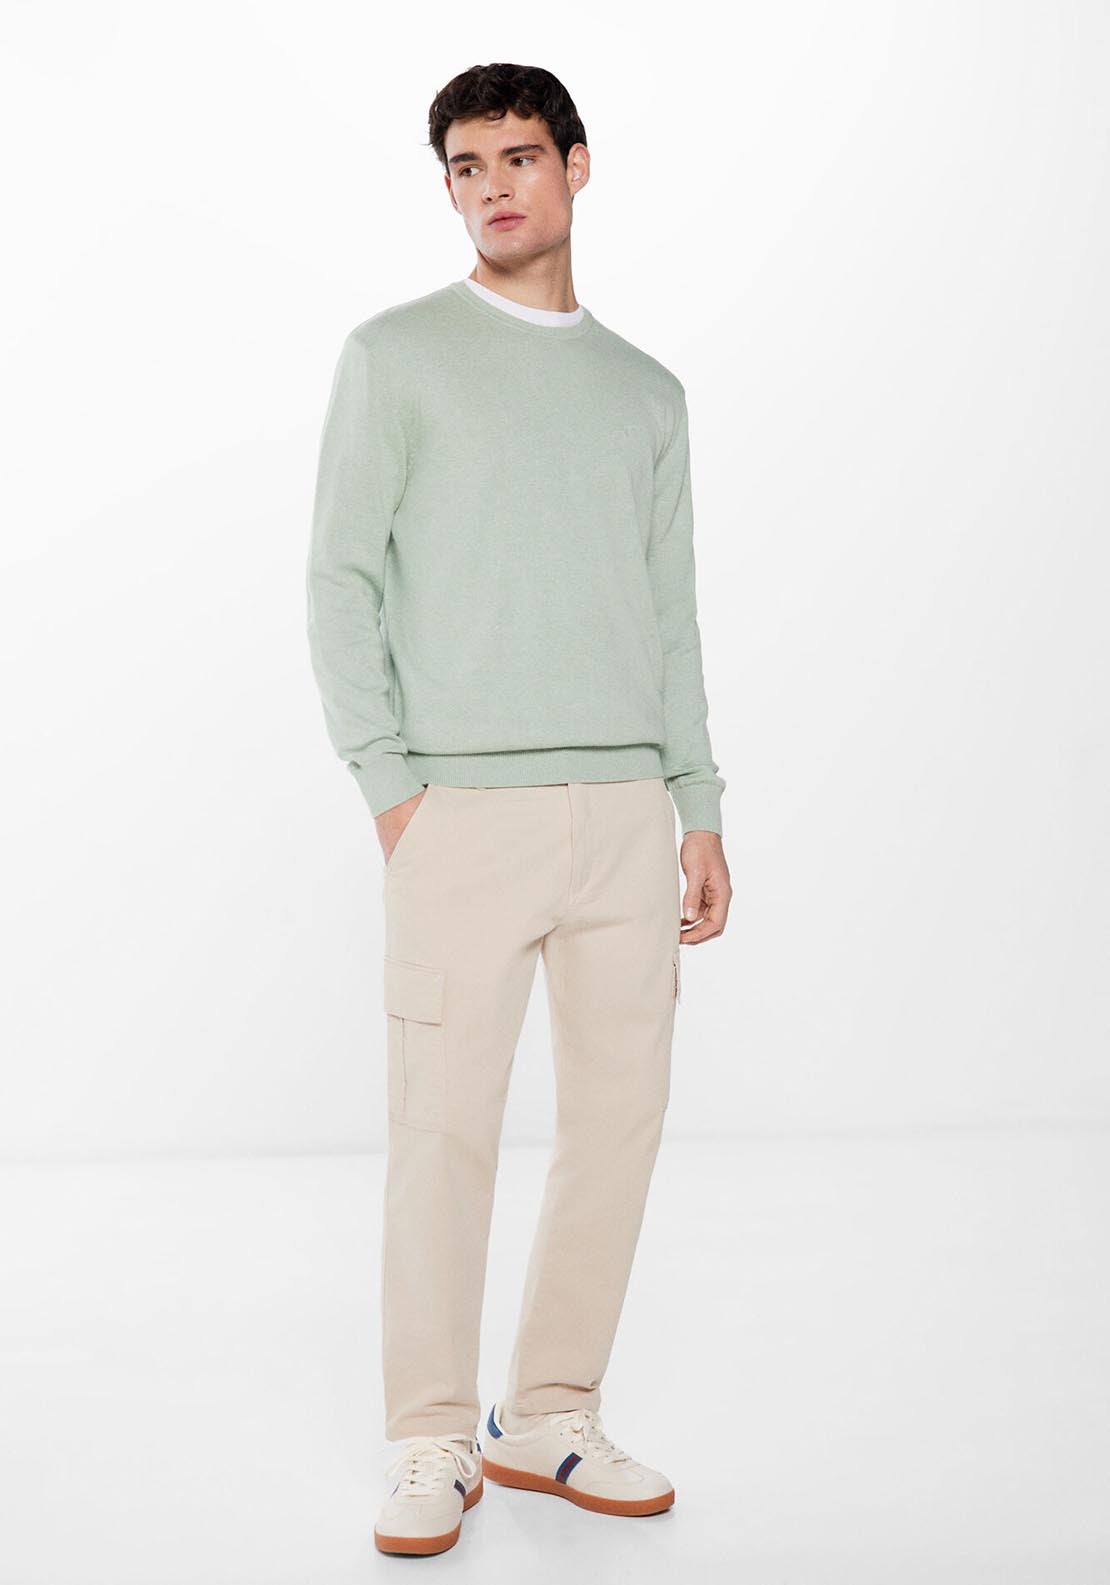 Springfield Essential jumper with elbow patches - Green 4 Shaws Department Stores